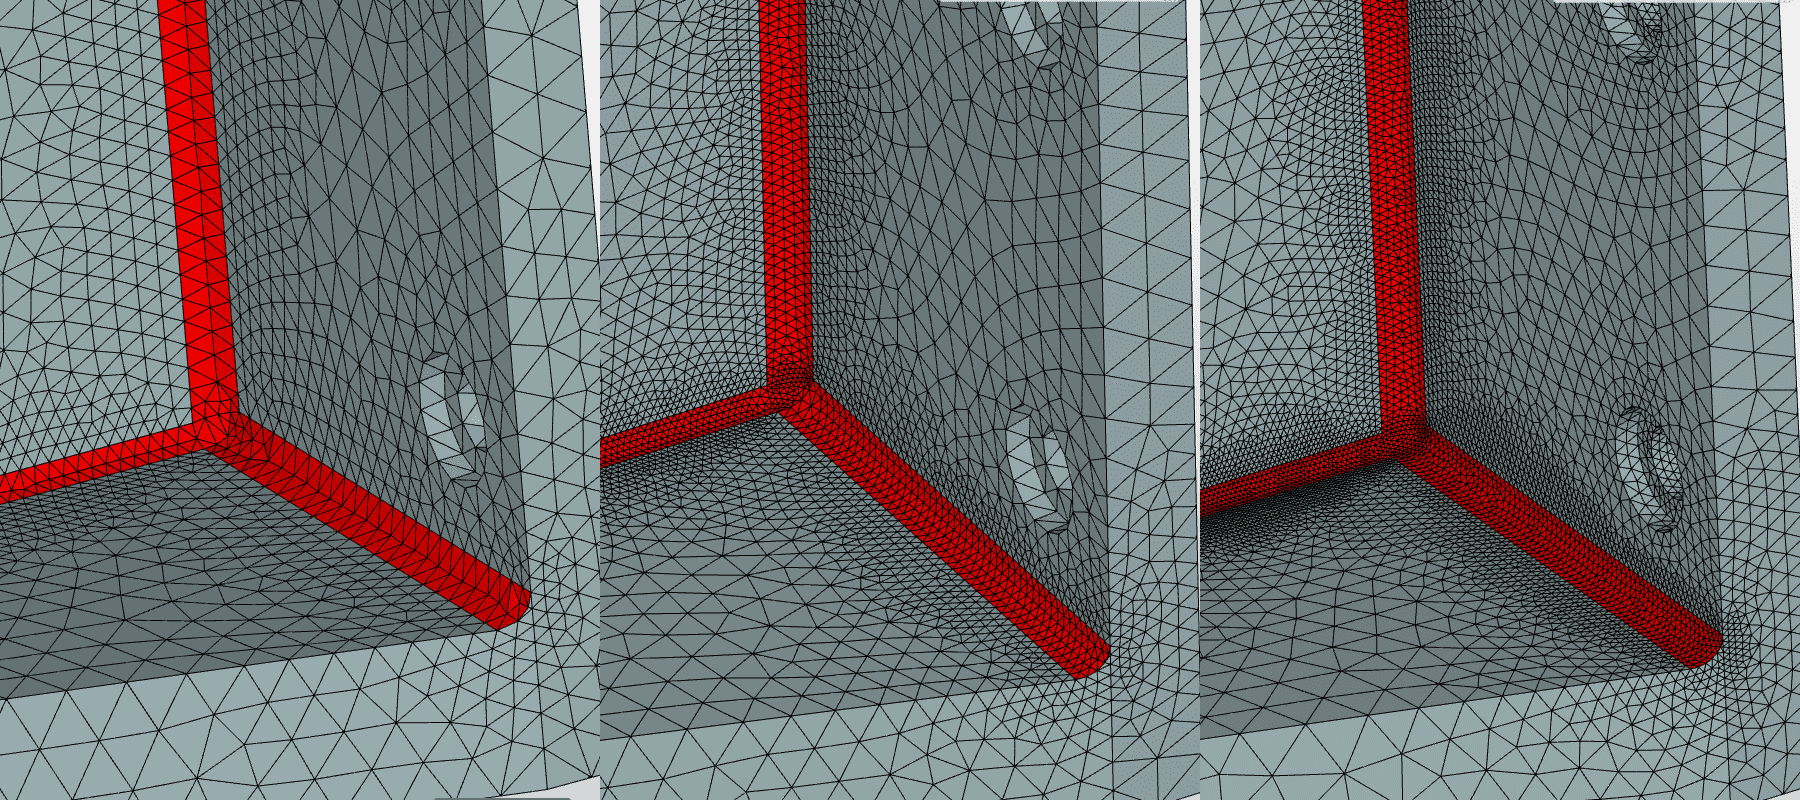 NMM mathematical and physical meshes.